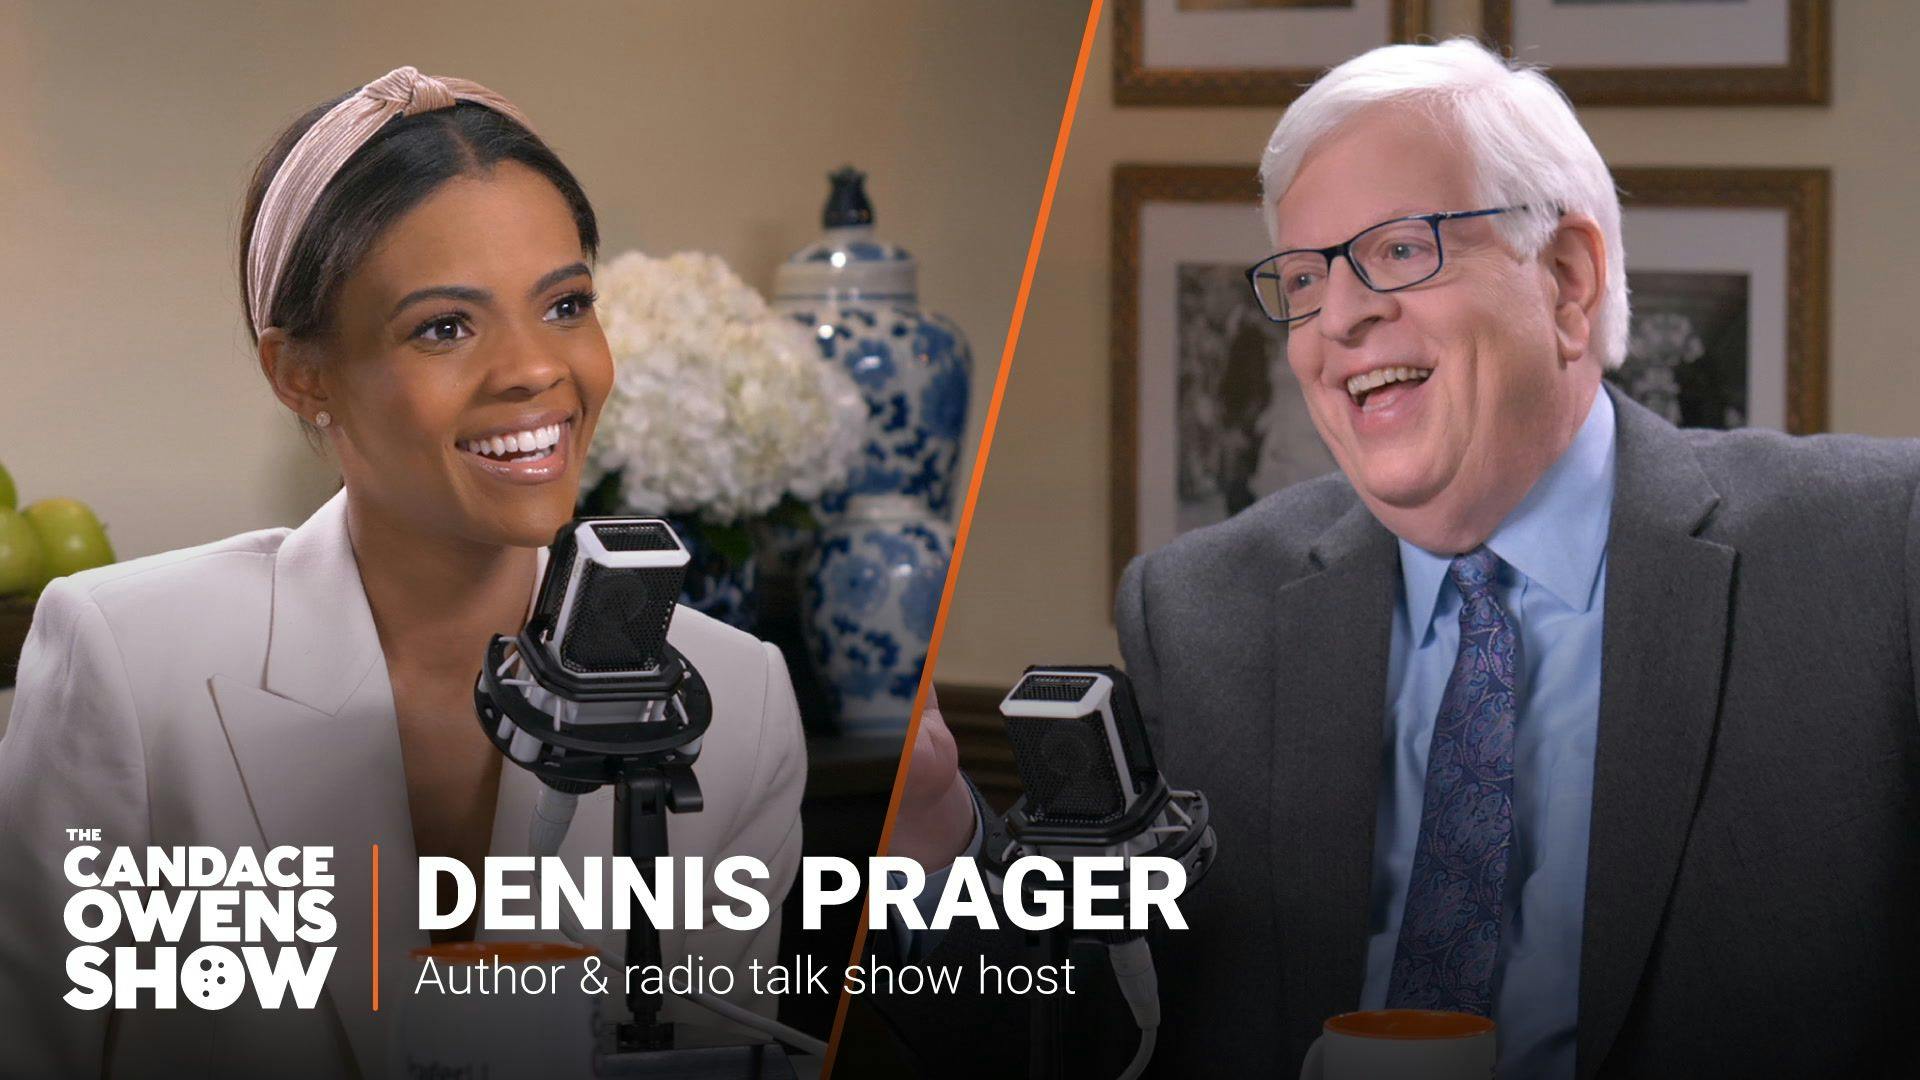 The Candace Owens Show: Dennis Prager